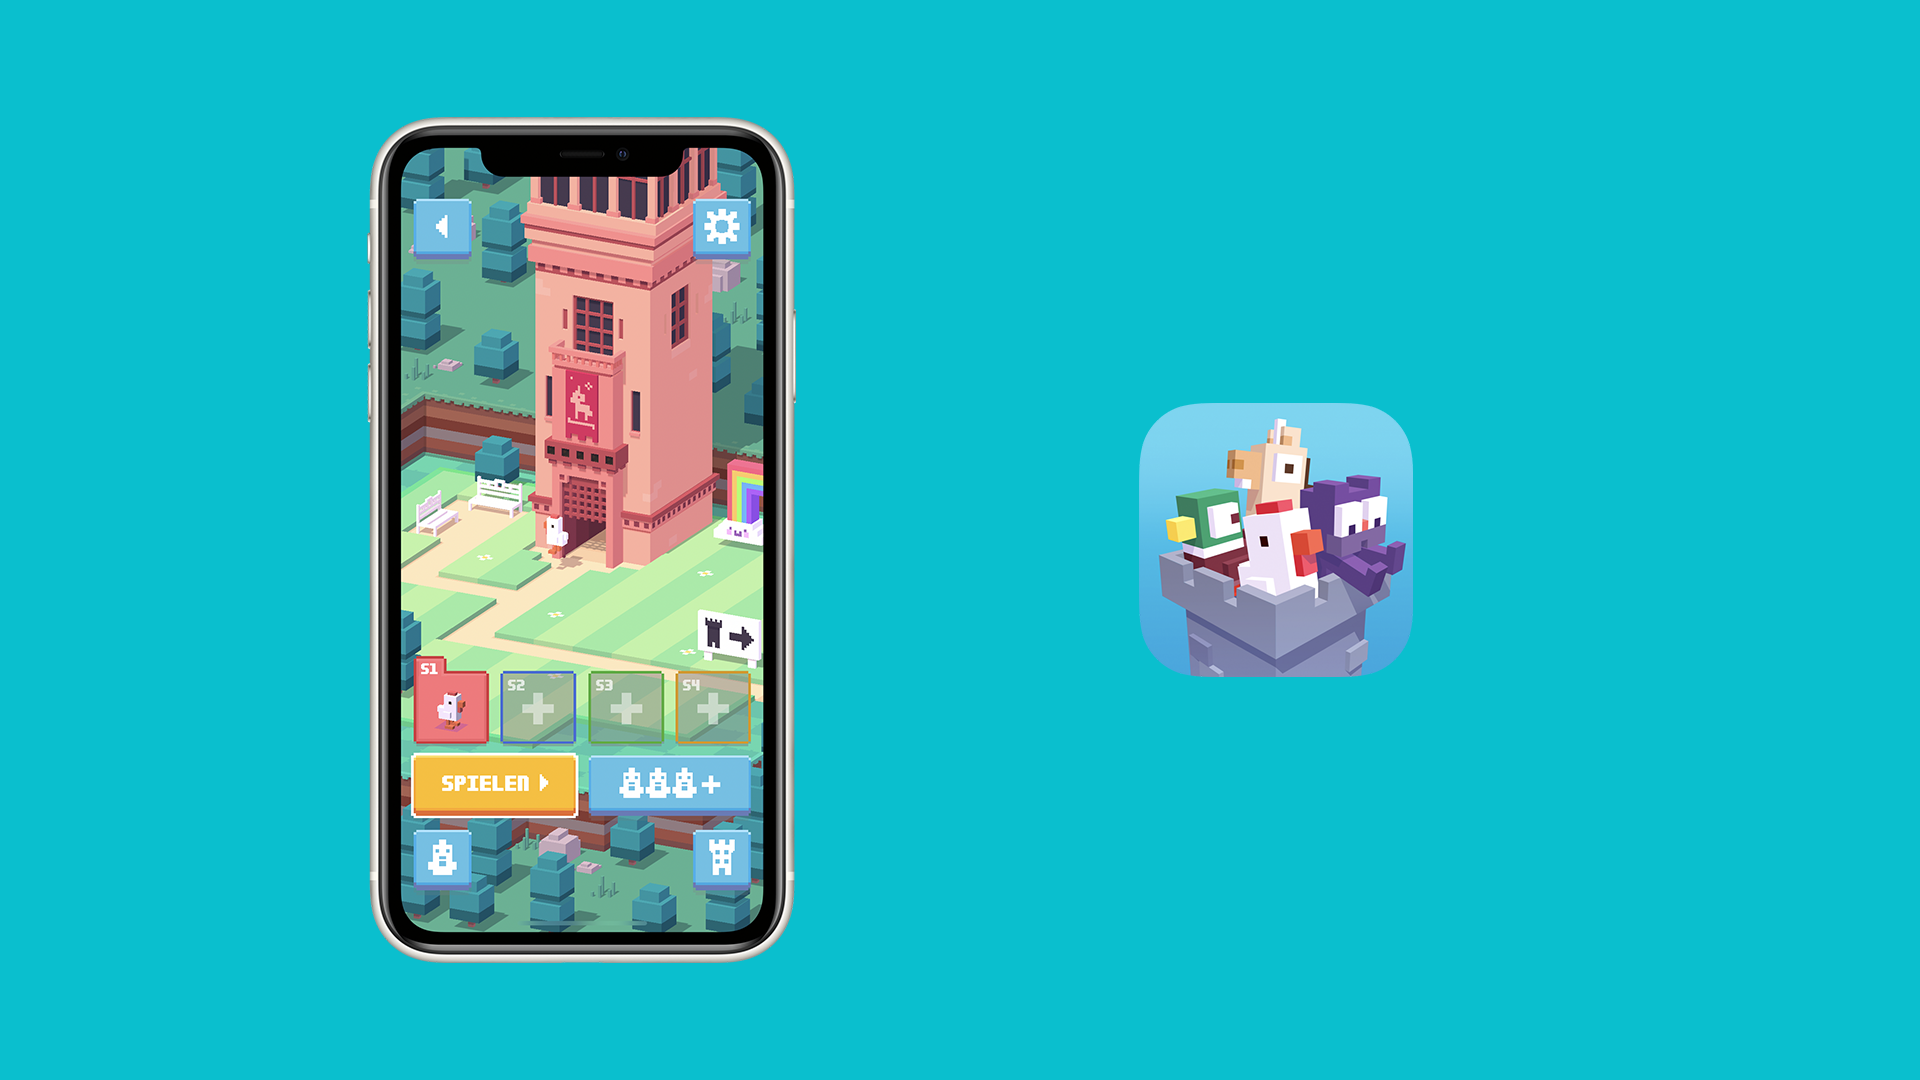 Hit game Crossy Road+ is now available for download in Apple